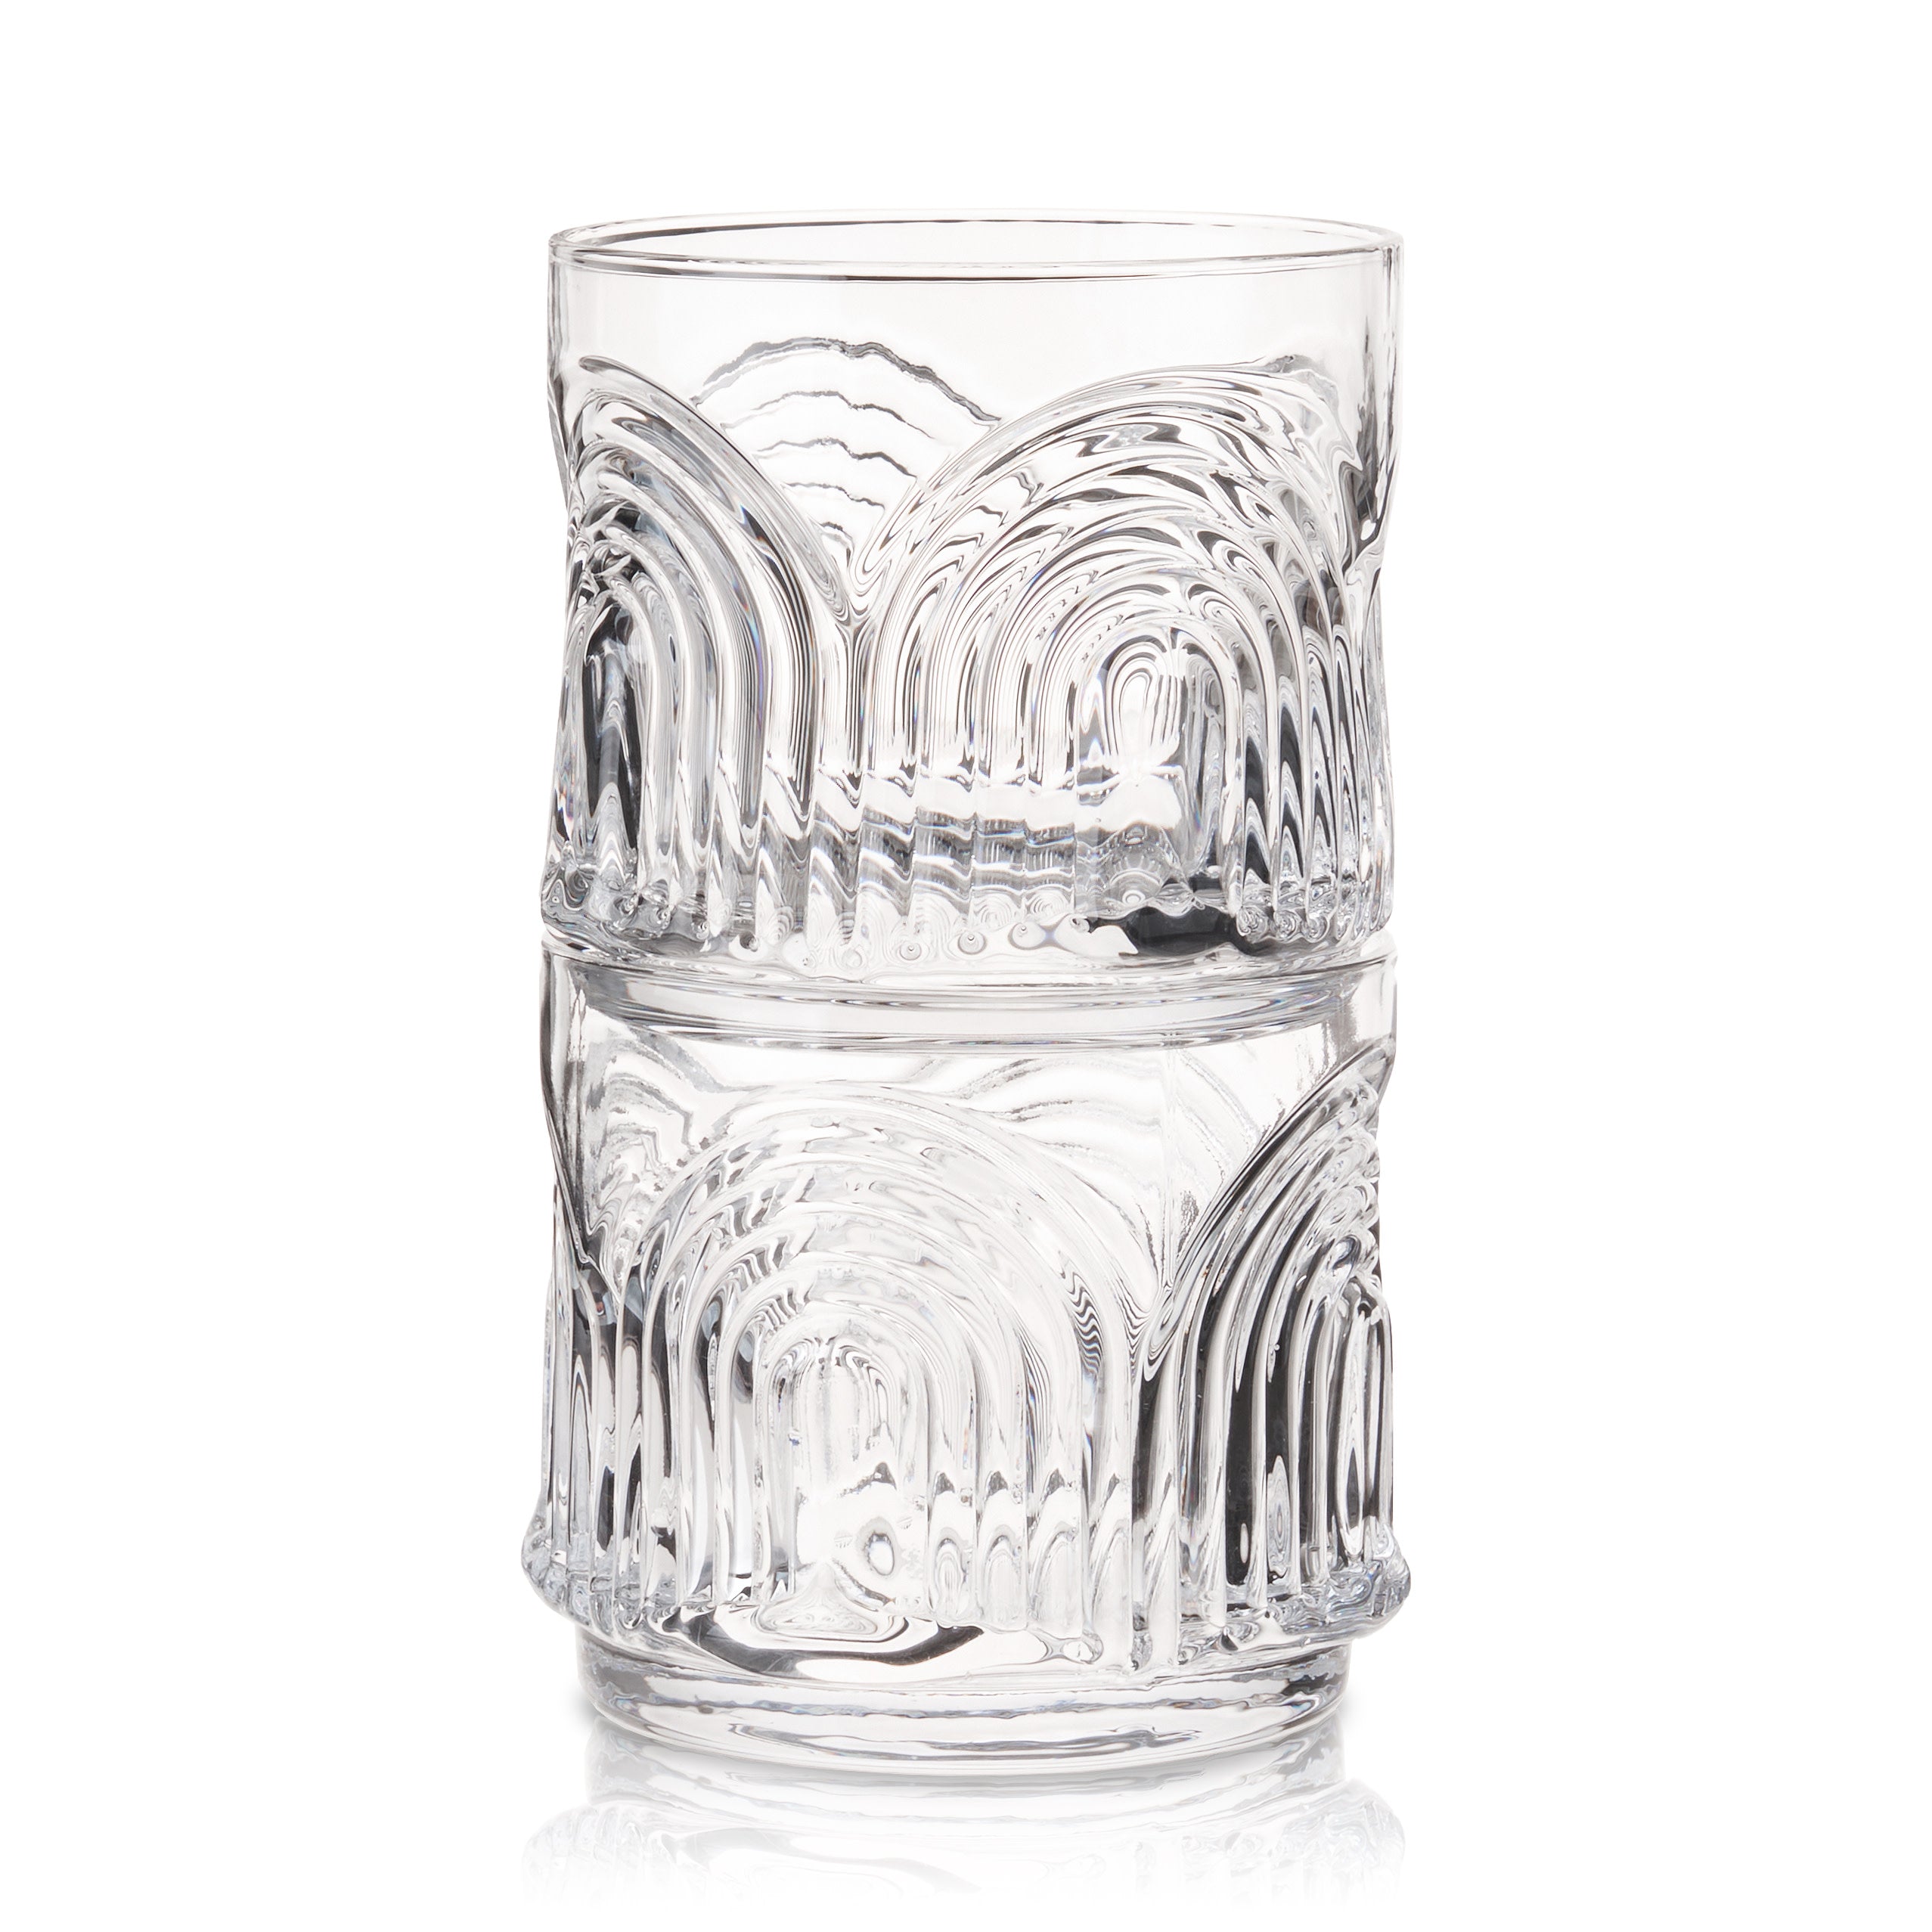 Sister.ly Drinkware Diamond Bottom Lowball Whiskey Glasses, Set of 2, 8 Ounces, Size: One size, Clear